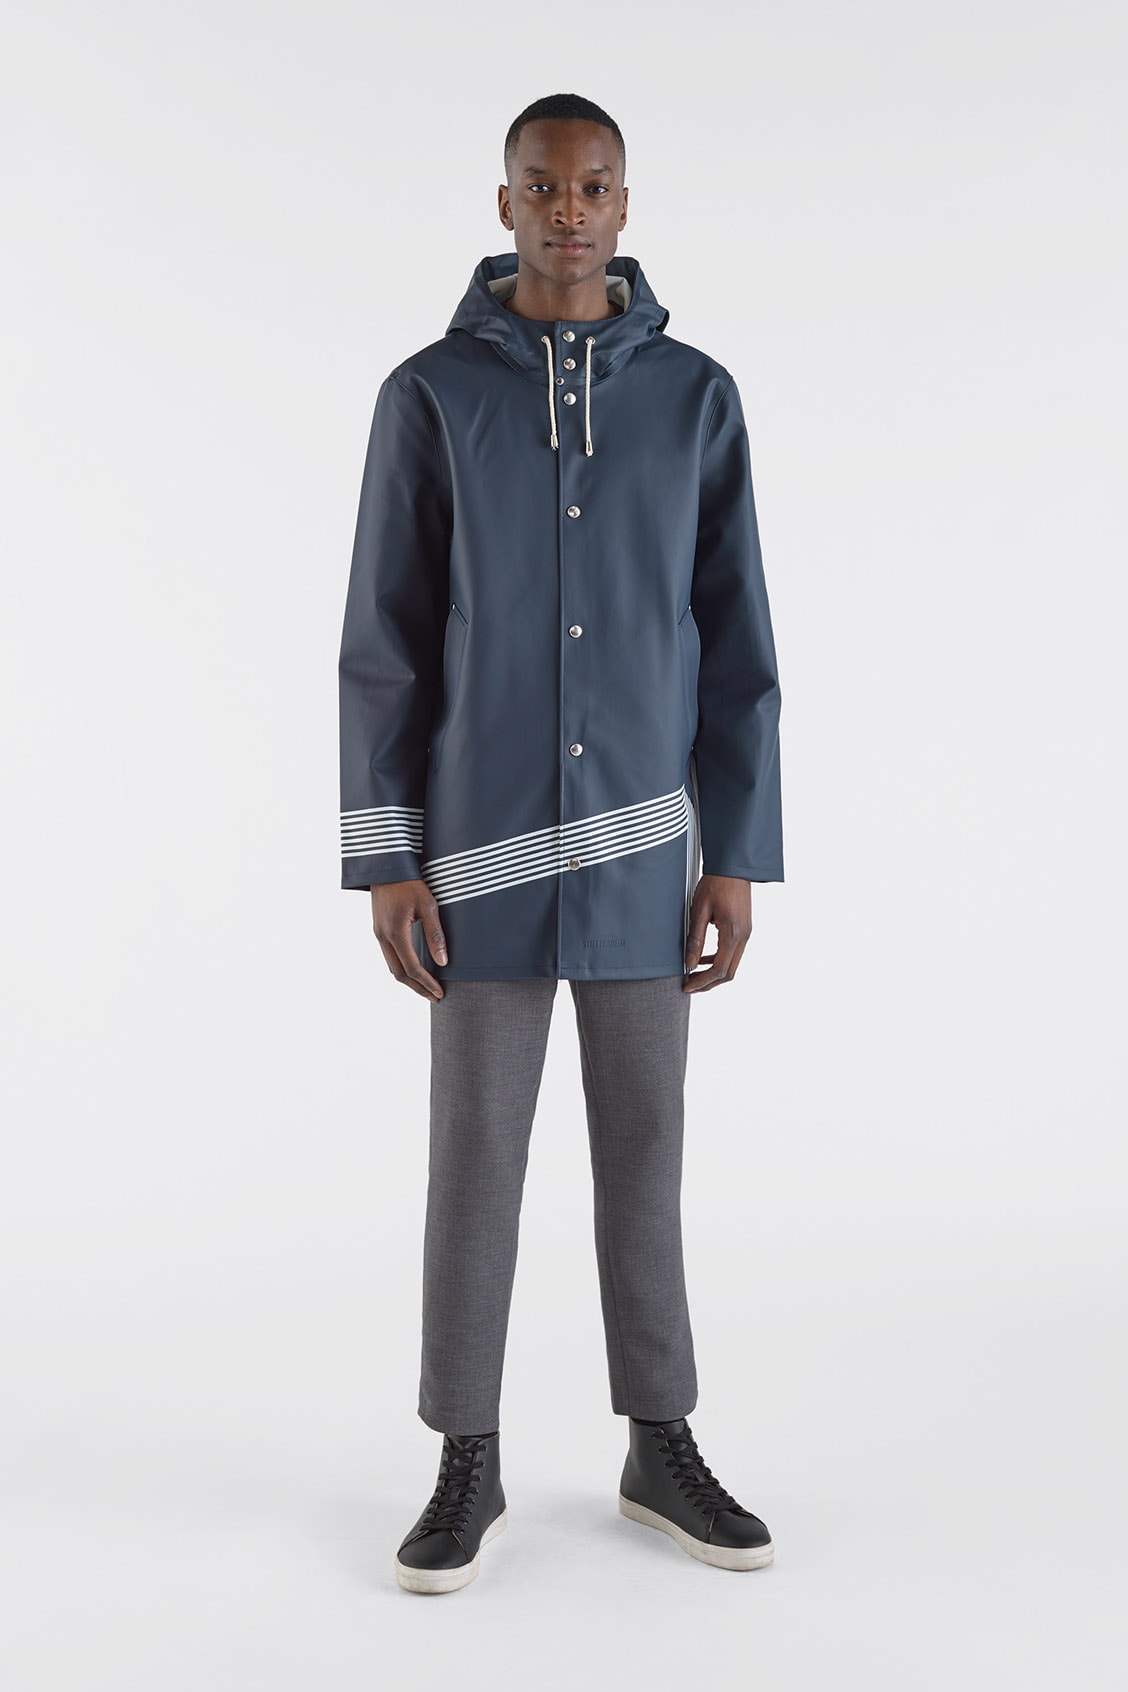 Band of Outsiders Stutterheim Fall Winter 2018 FW 2018 London Fashion Week Mens Raincoat Collaboration Collection